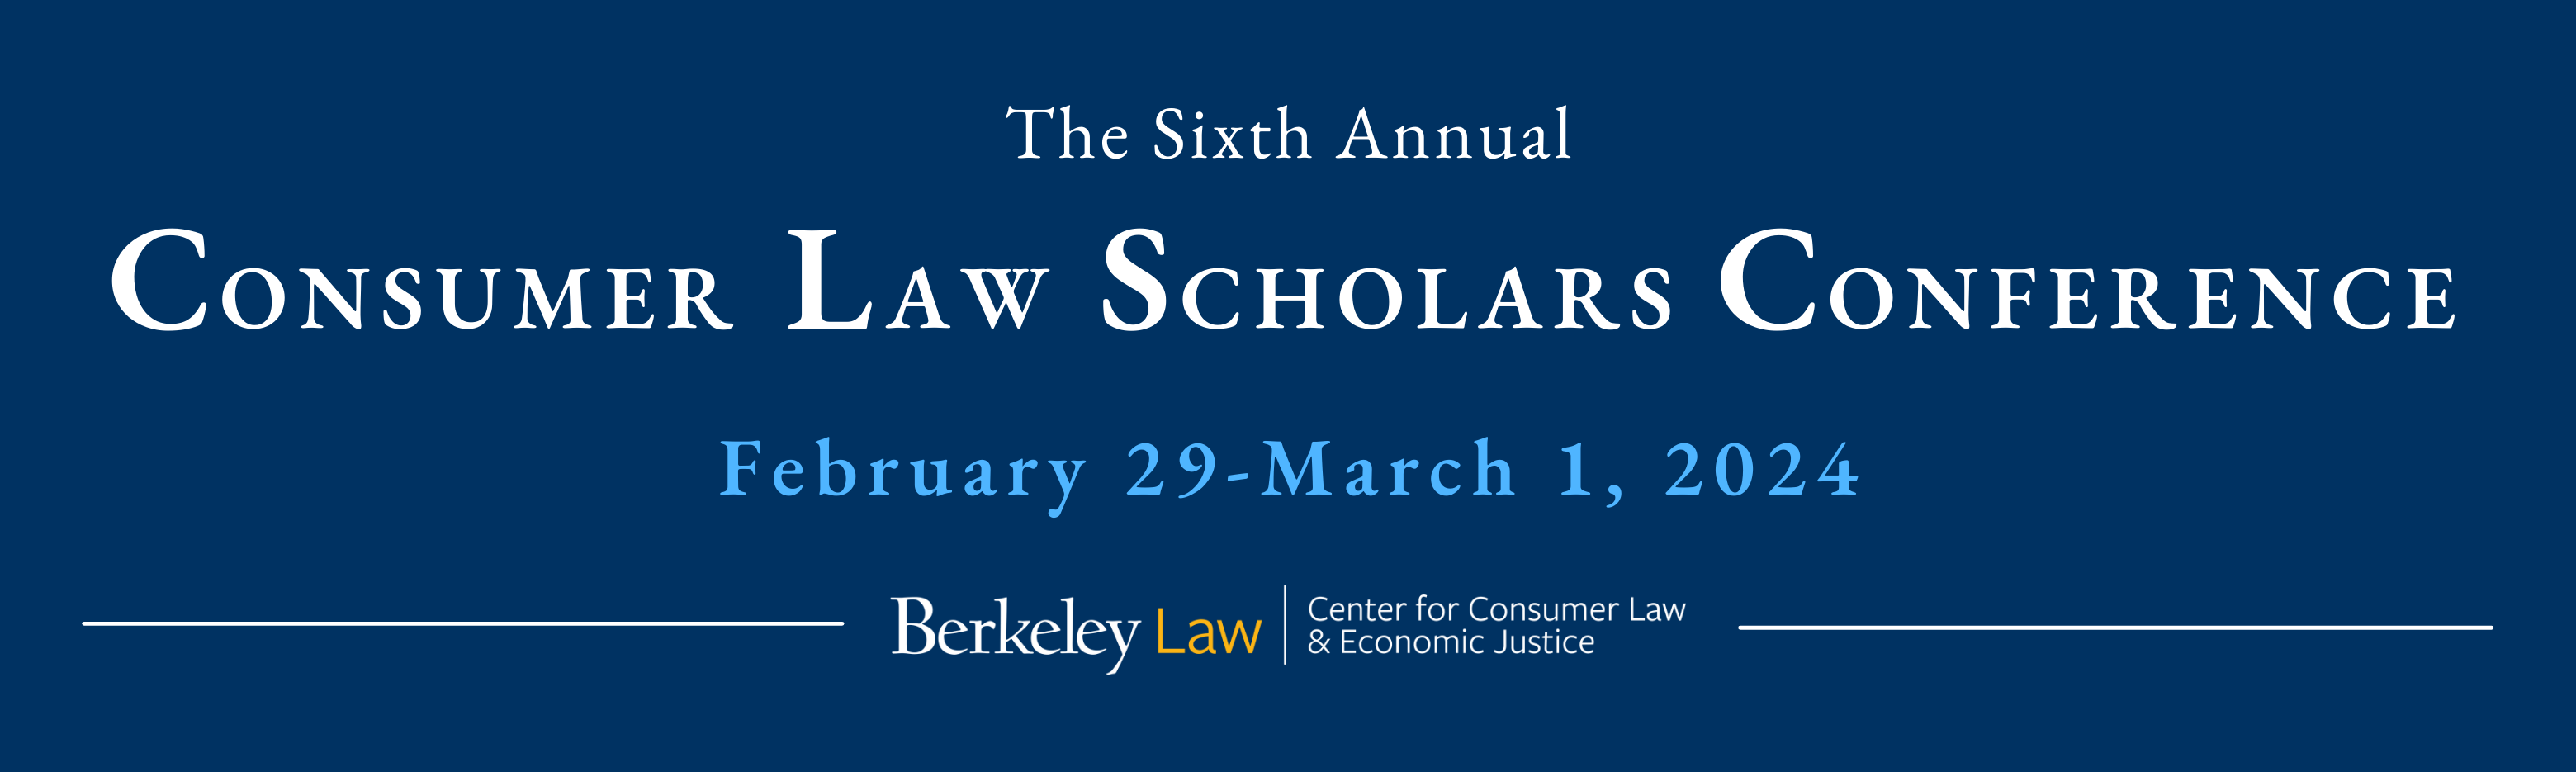 The 6th Annual Consumer Law Scholars Conference.  February 29-March 1, 2024.  Hosted by the Berkeley Center for Consumer Law & Economic Justice